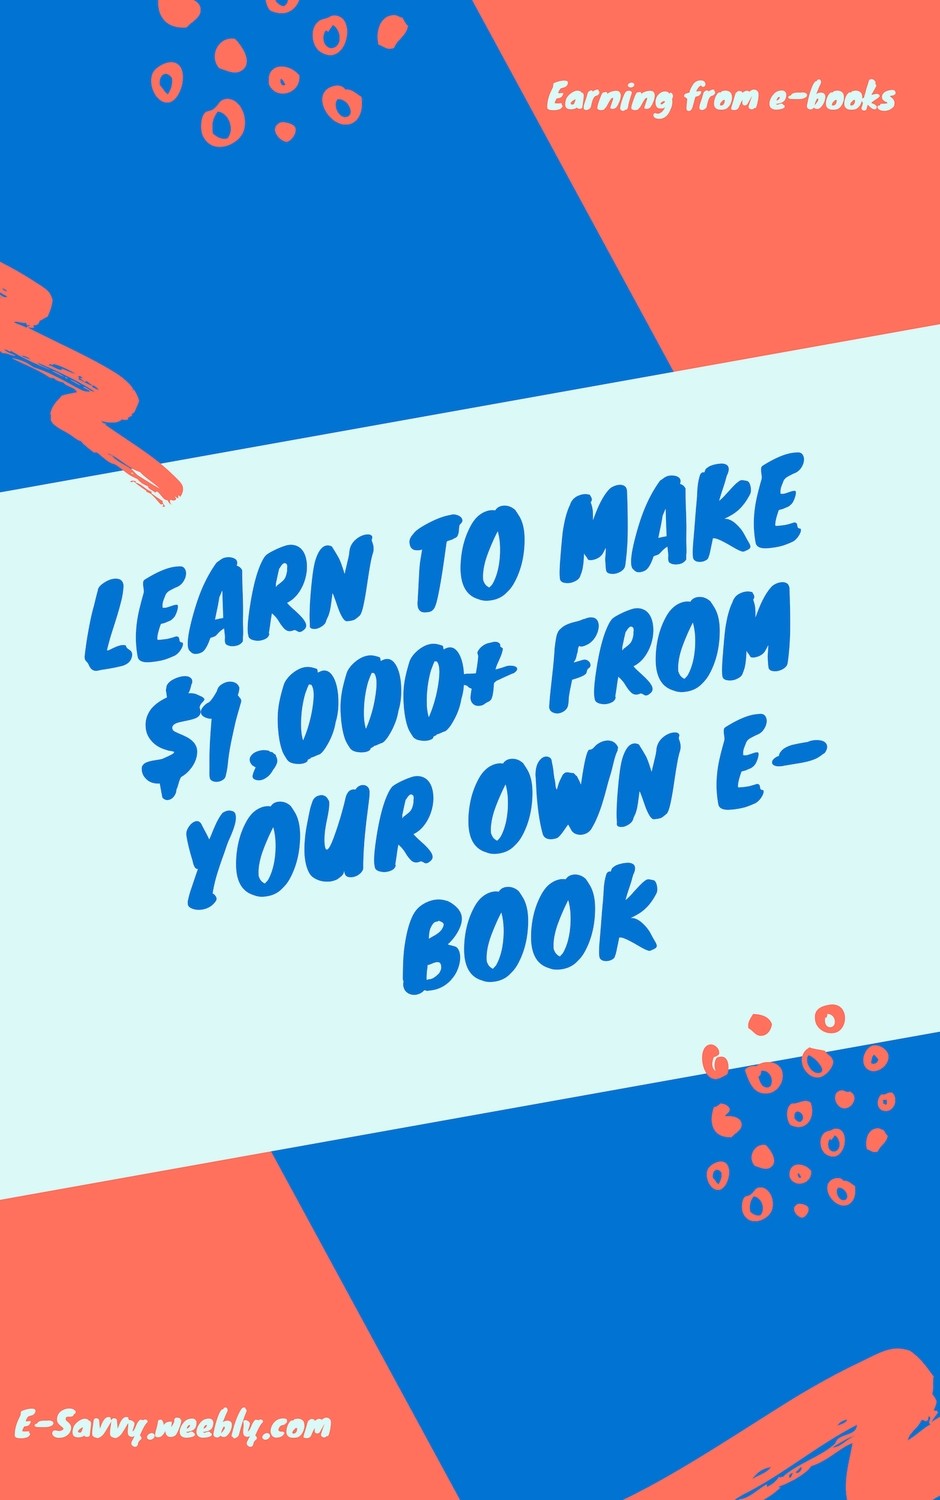 Learn How To Make Your Own e-Book & Make $1,000+ A Month From It Video Course